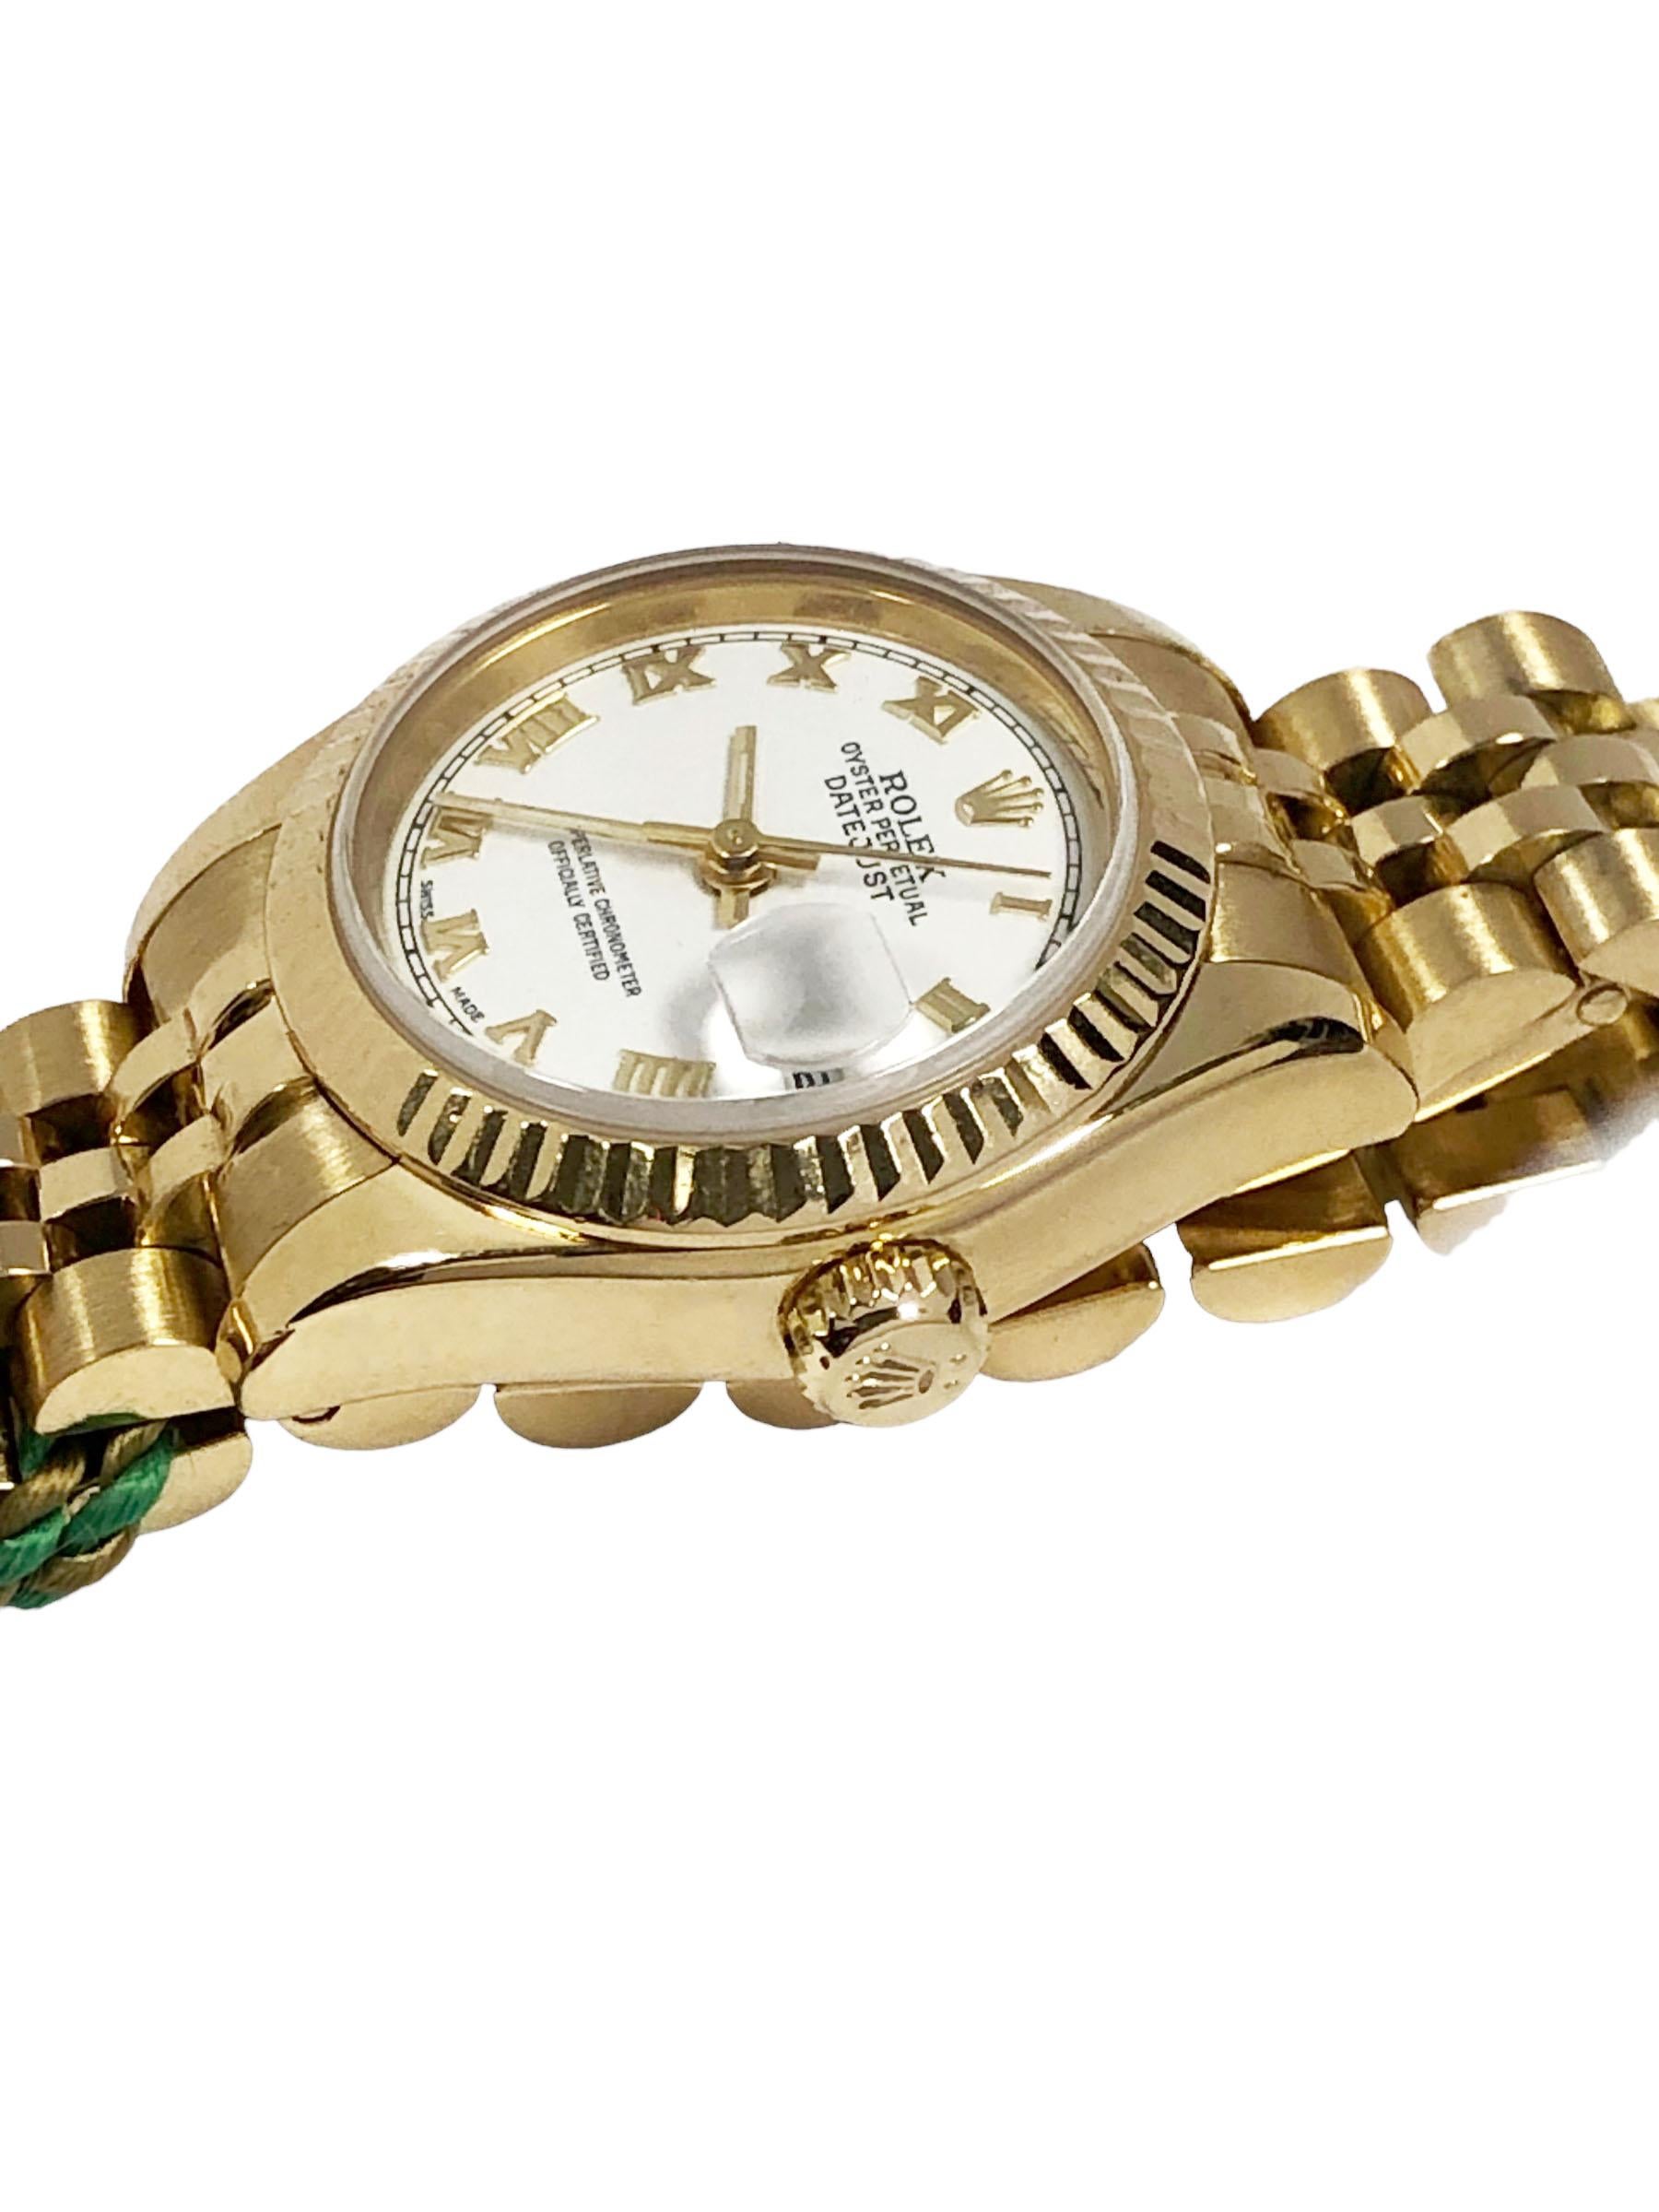 Circa 2004 Rolex Ladies President model Wrist Watch, Reference 179178. Having one owner and was seldom worn, 26 M.M 18K yellow Gold 3 Piece Water resistant case with Fluted Bezel, Automatic, Self winding movement, White Dial with Raised Gold Roman